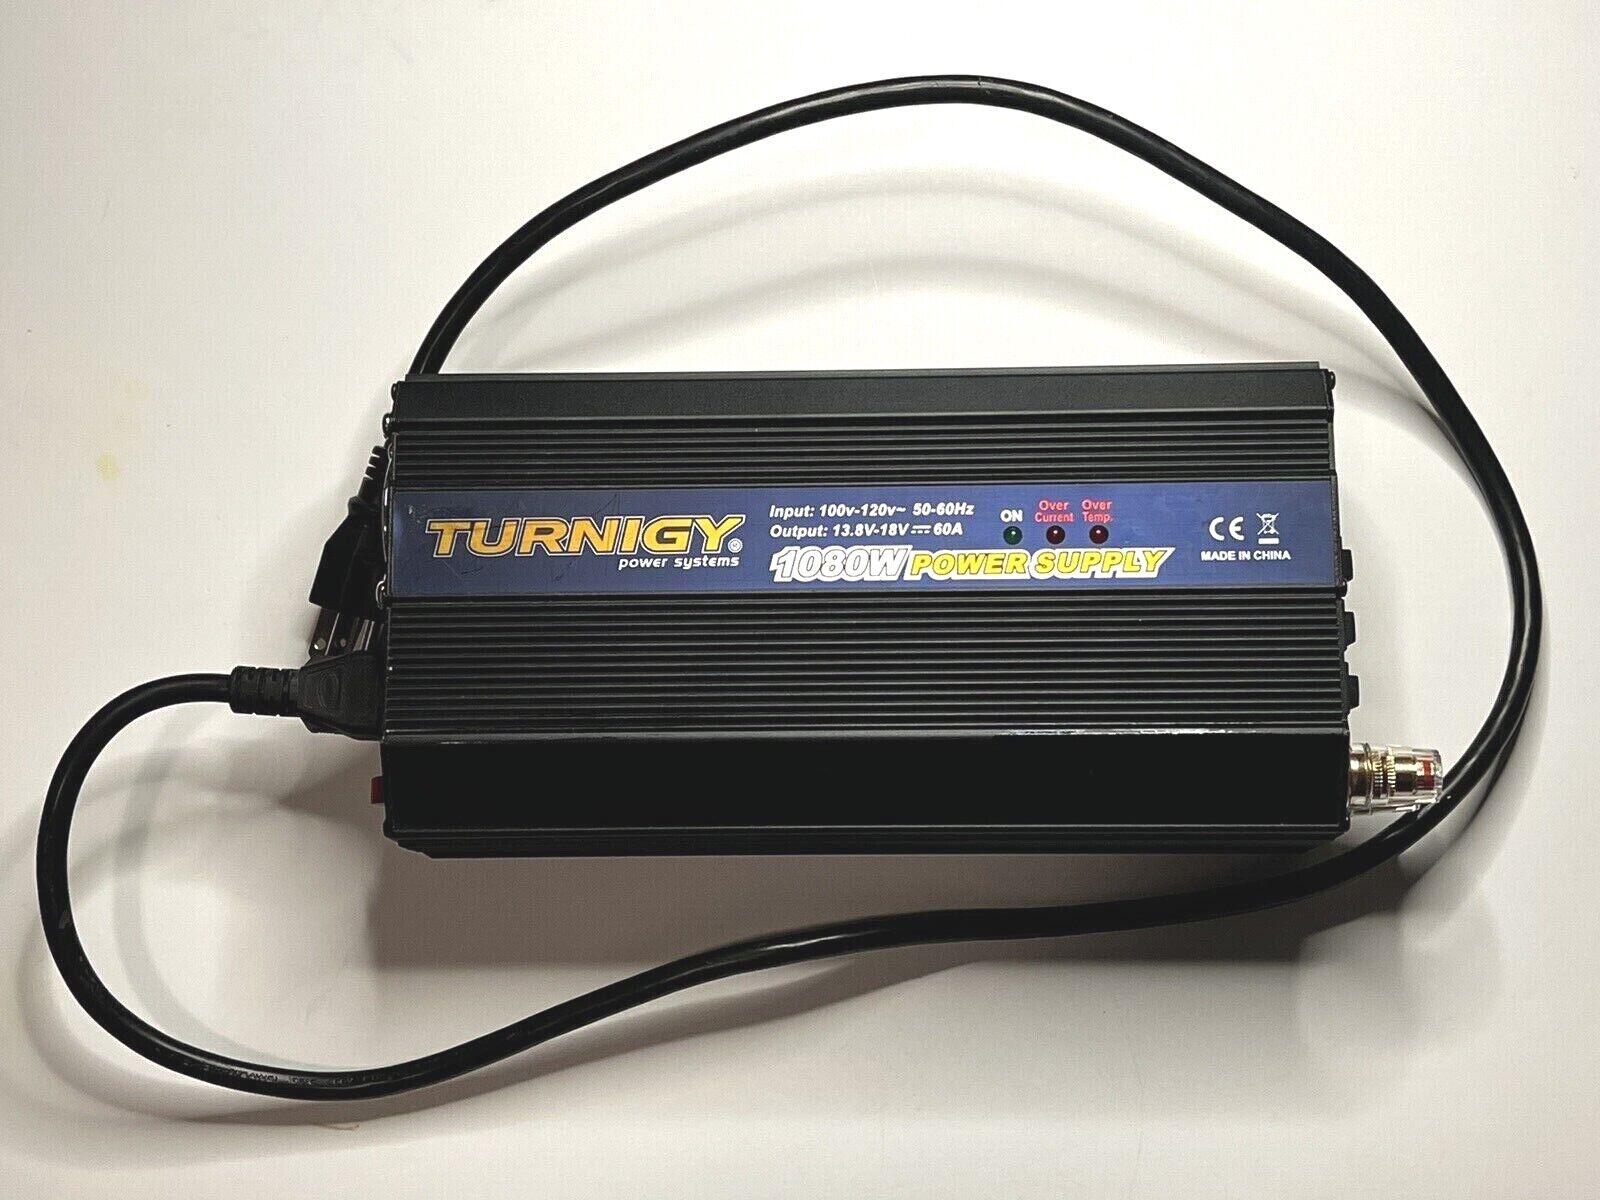 Turnigy 1080w 1080 Watt 60 Amp 60 RC DC Battery Charger Power Supply Excellent